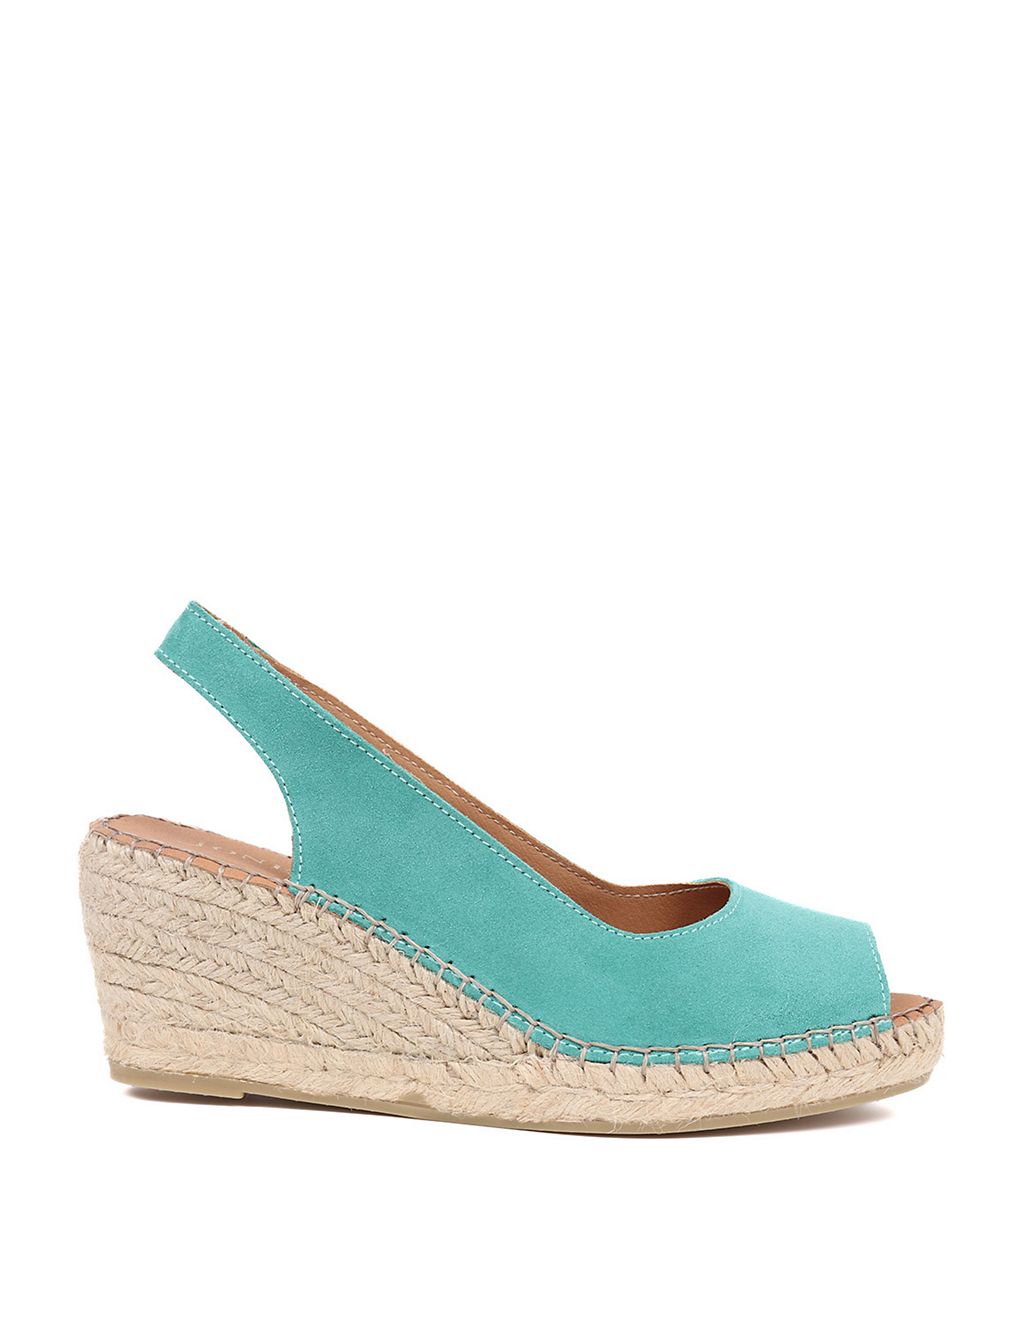 Suede Slingback Wedge Sandals 1 of 8